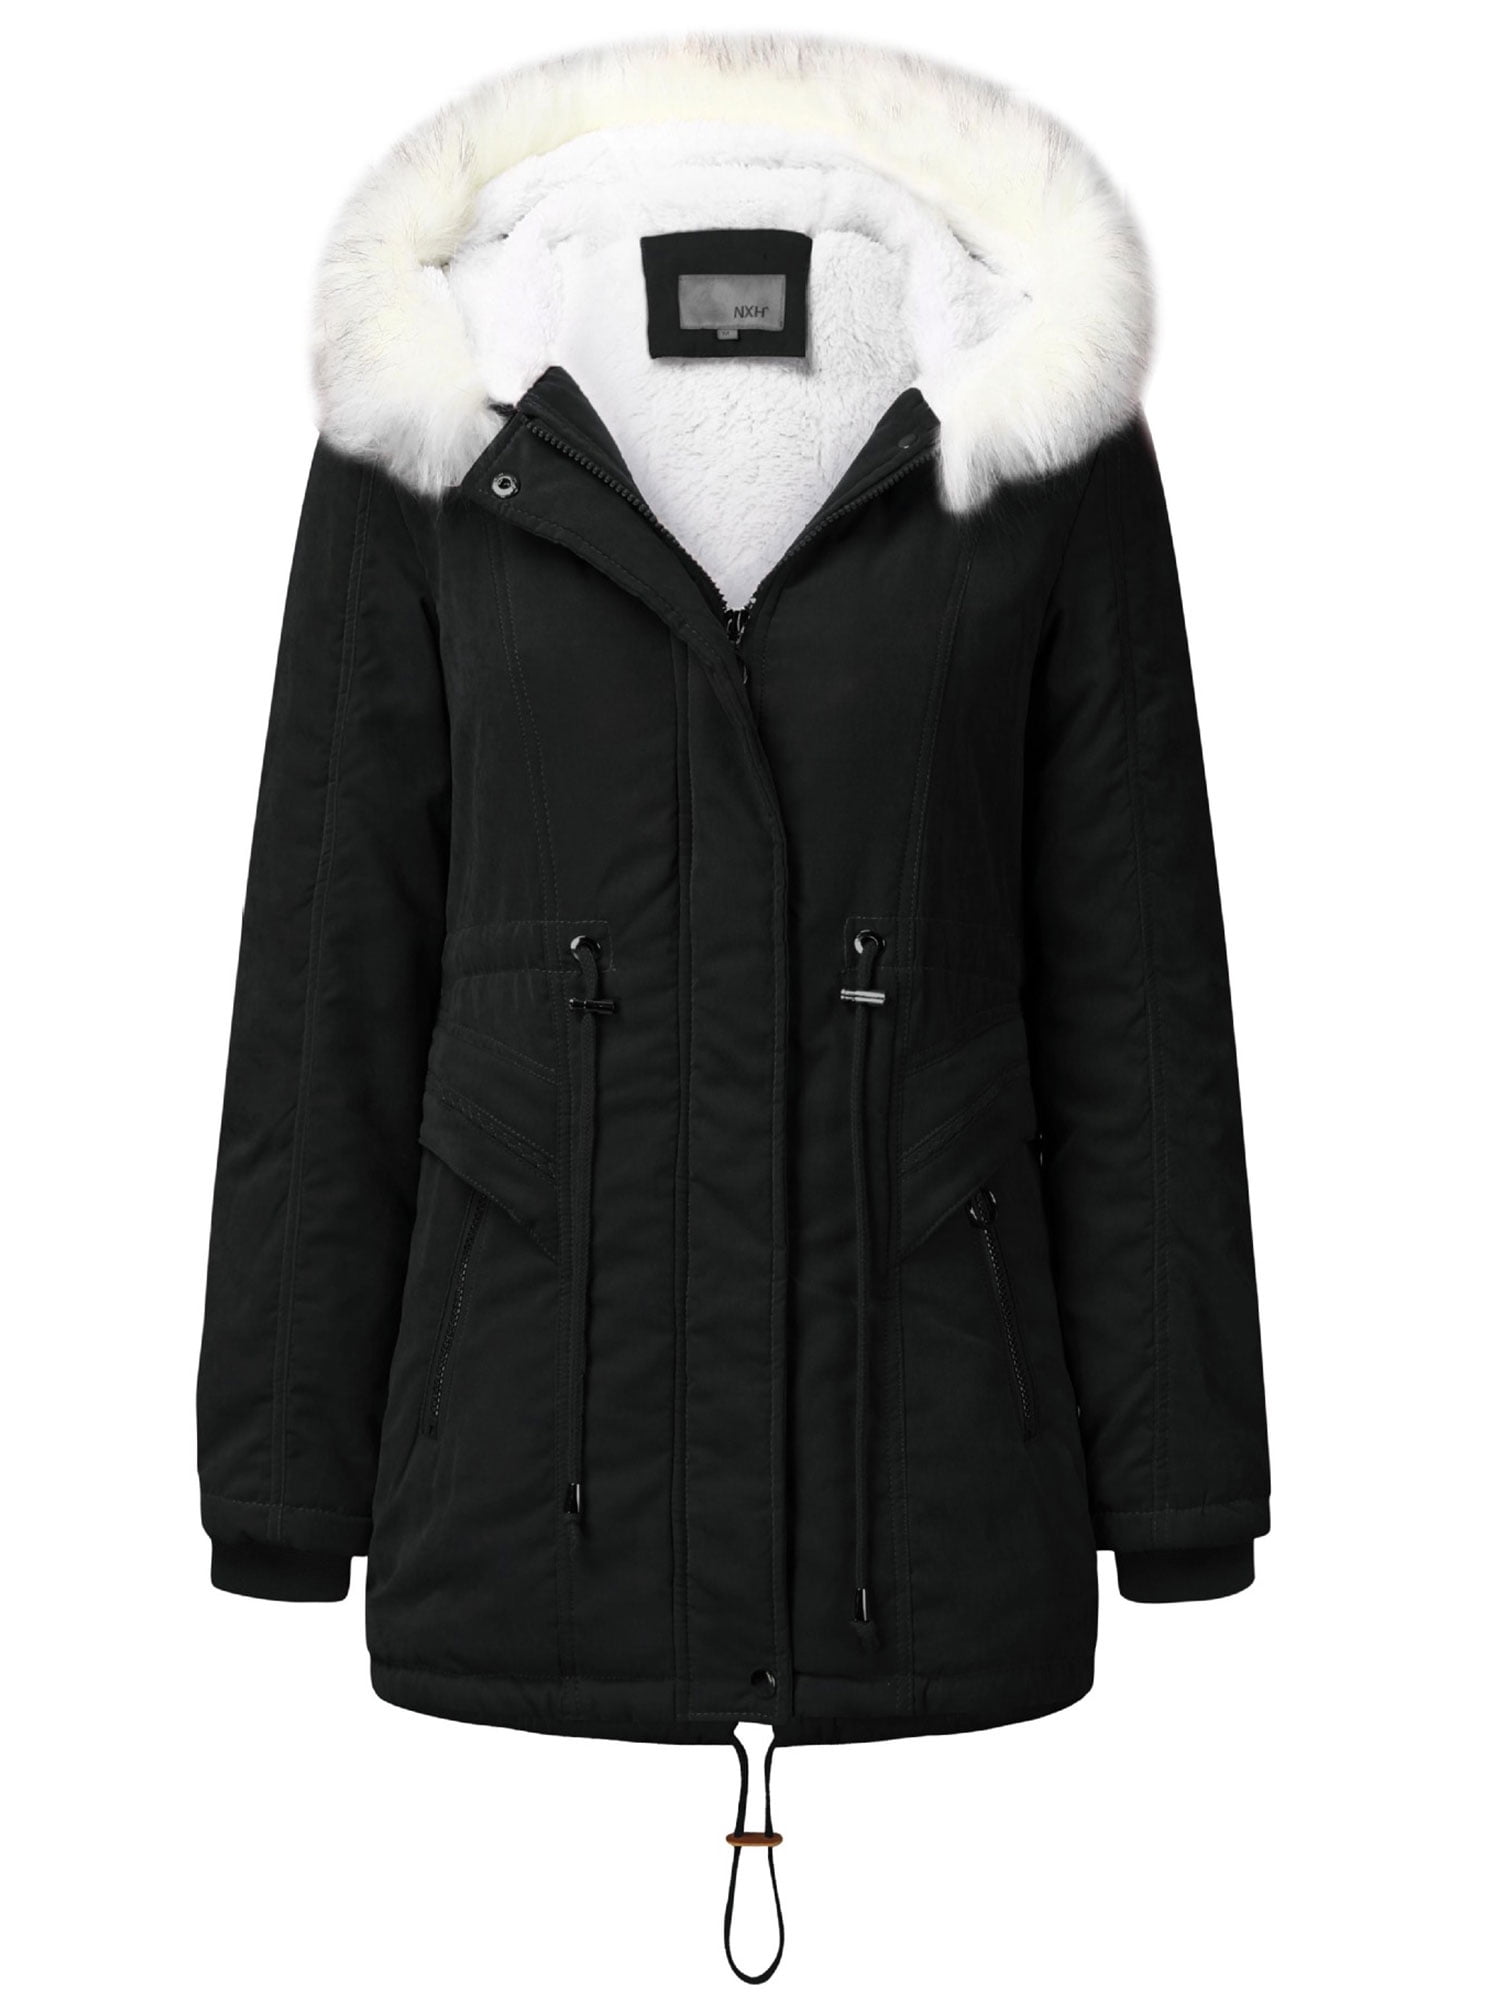 women's hot winter warm fur lined fur hooded Military outwear coat parka trench 